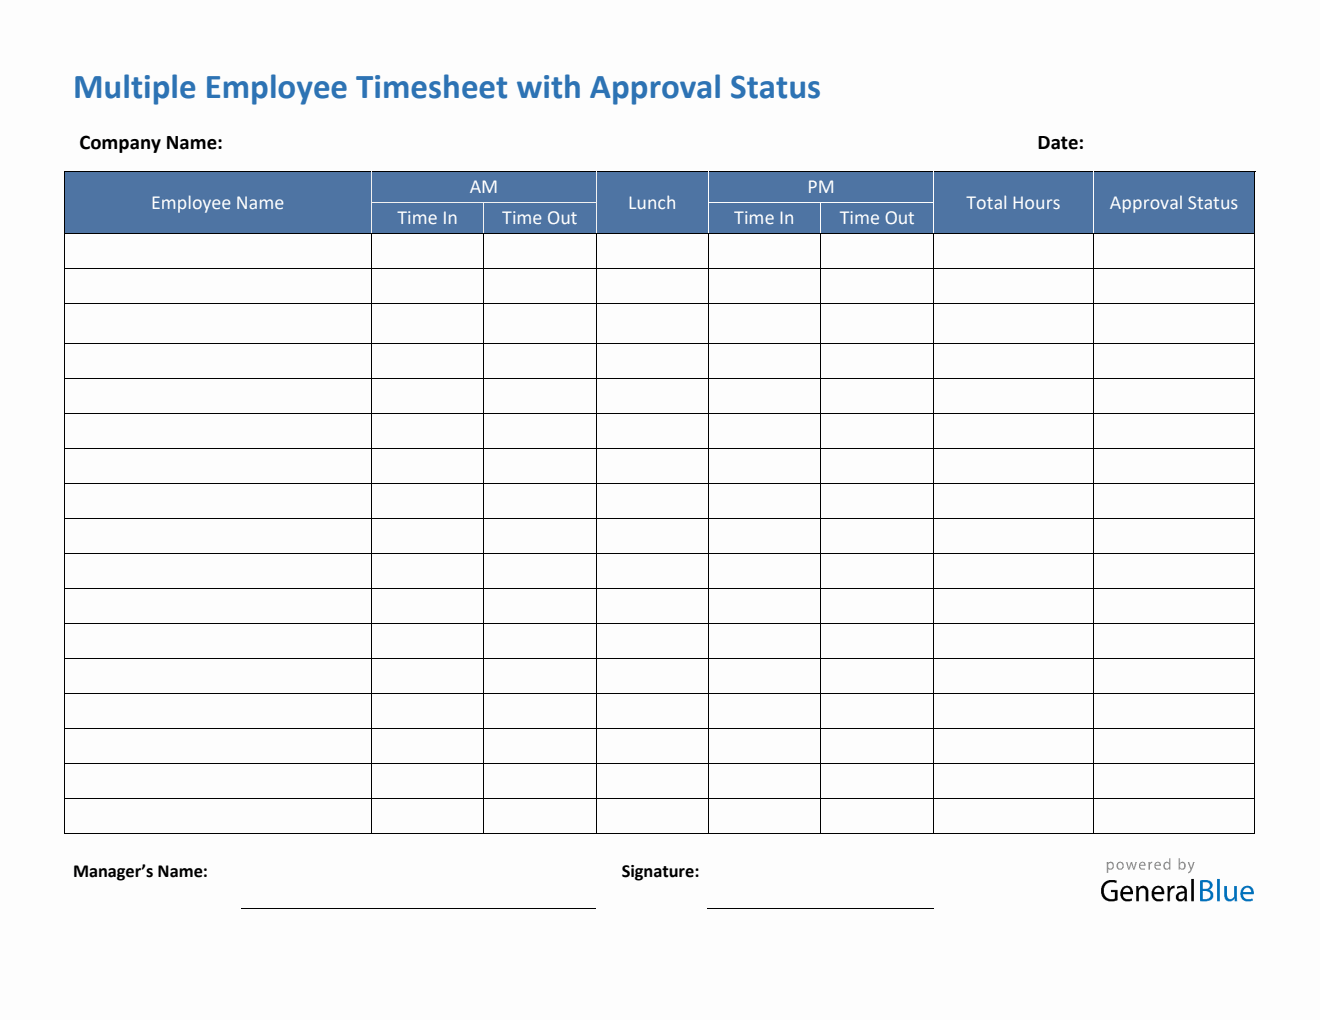 Multiple Employee Timesheet With Approval Status in Word